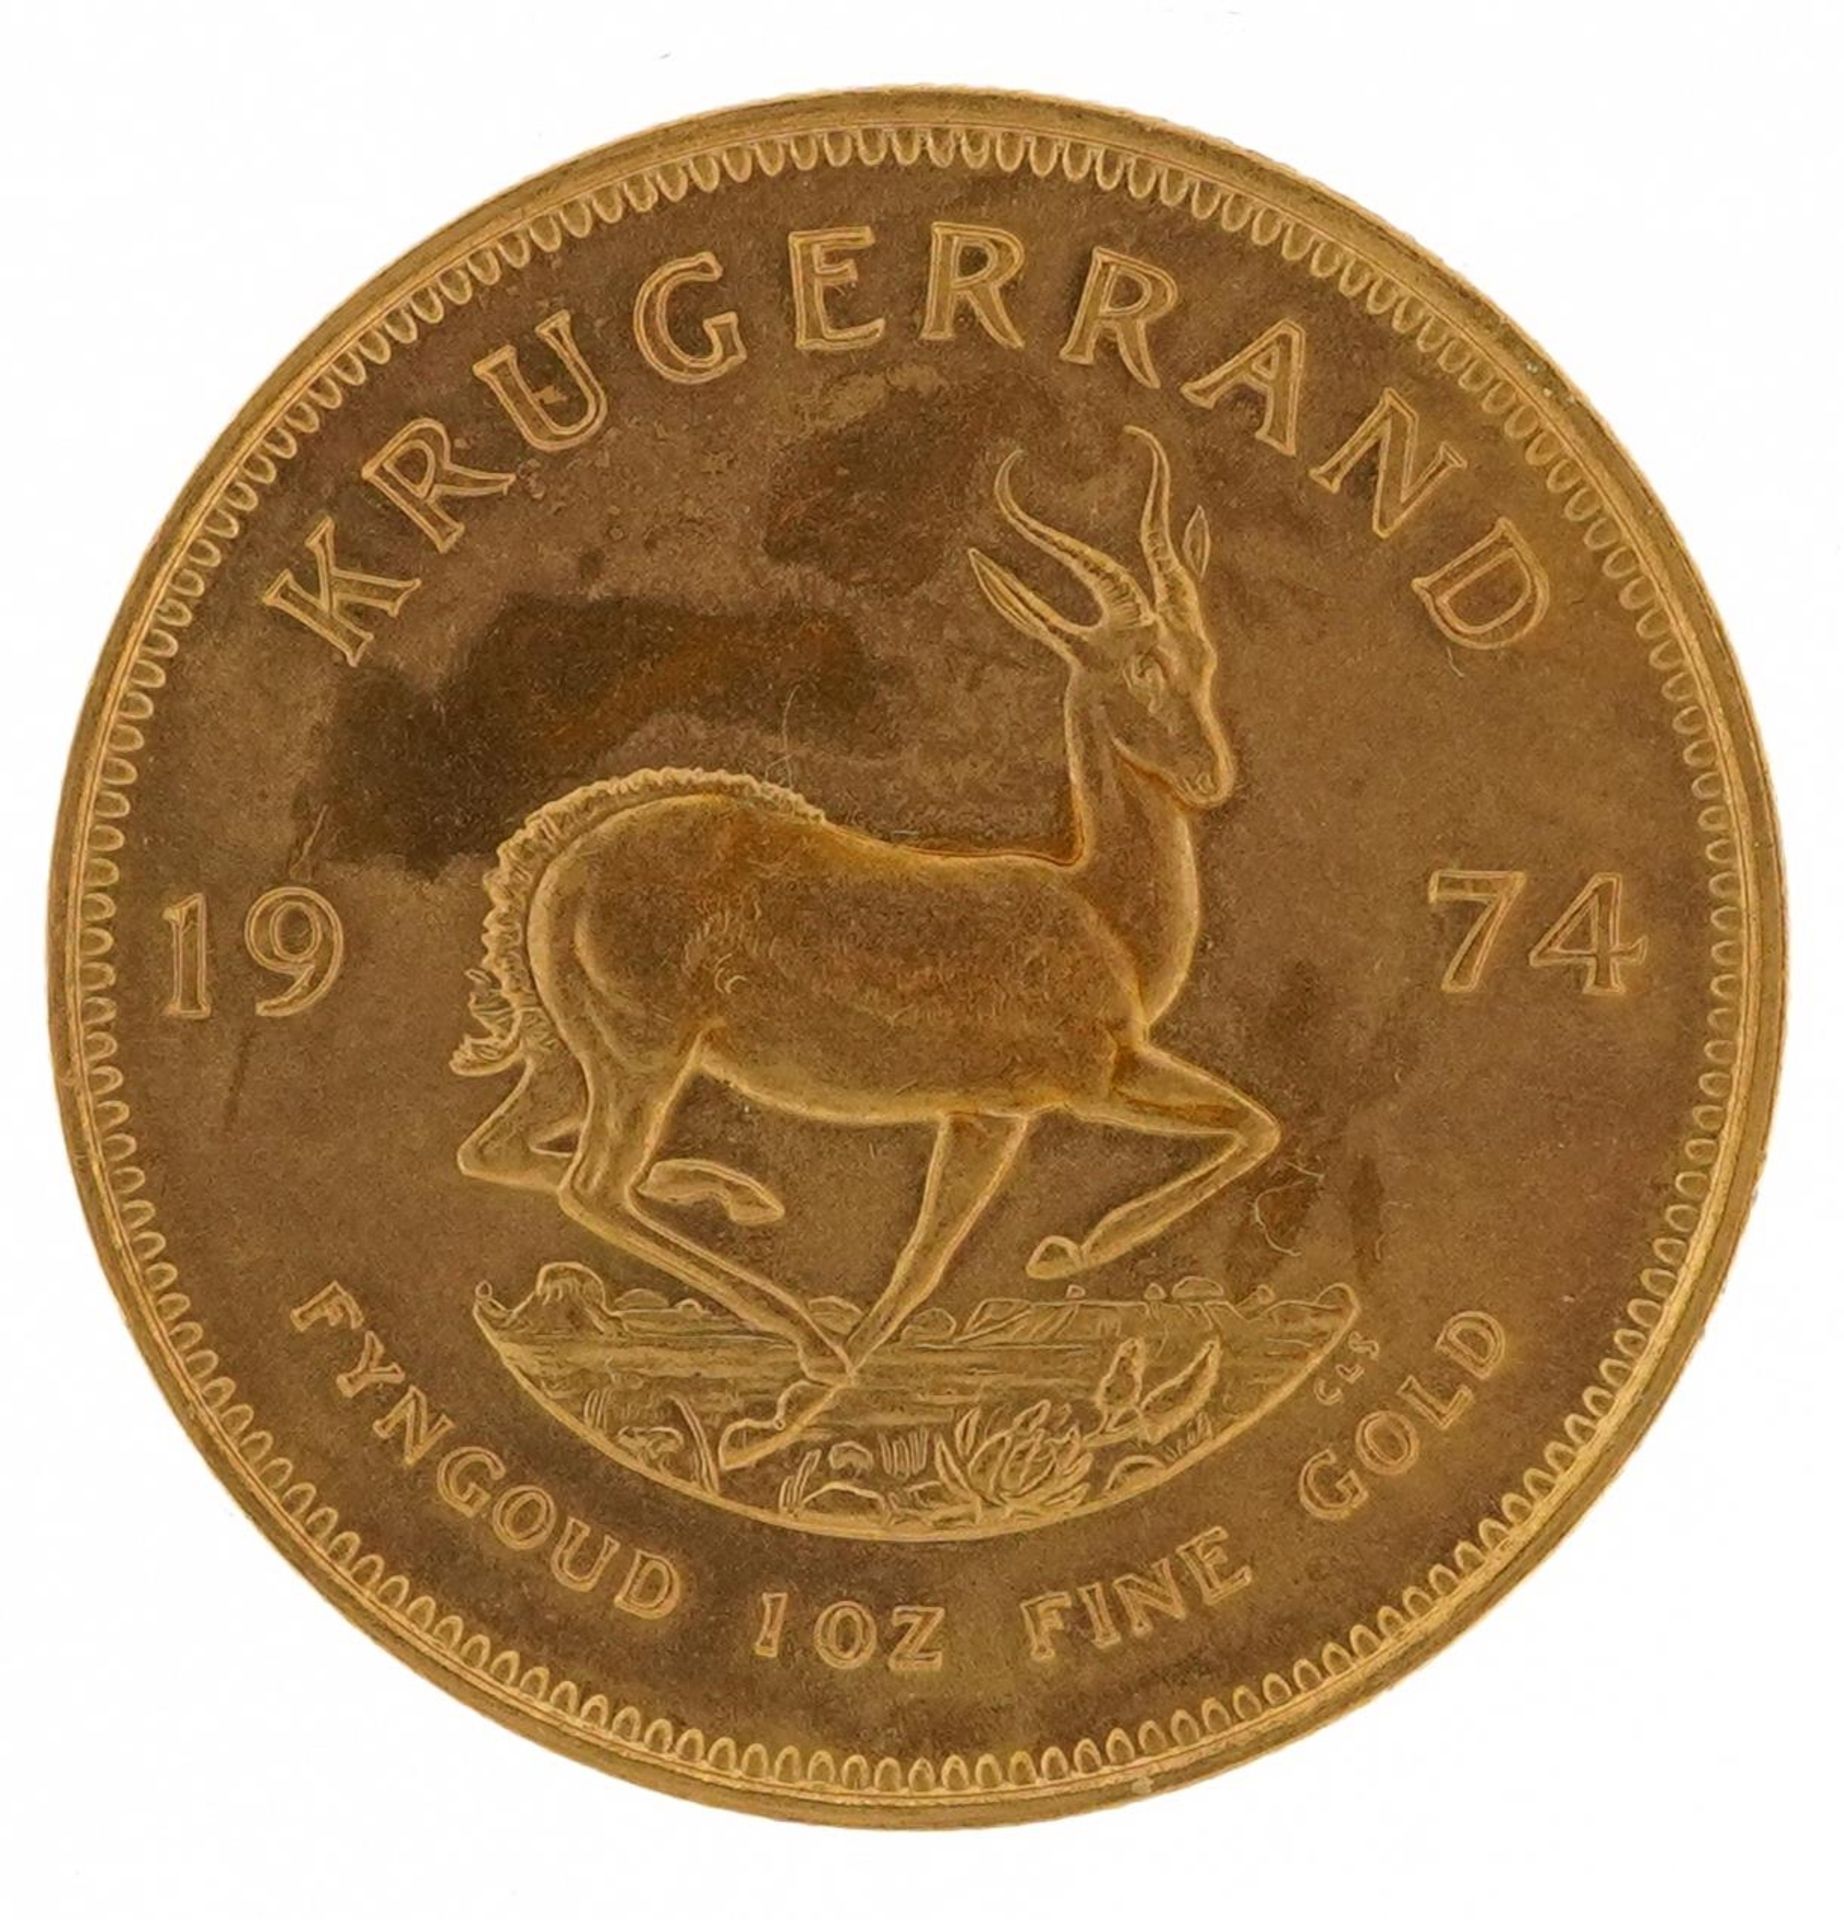 South African 1974 one ounce fine gold krugerrand